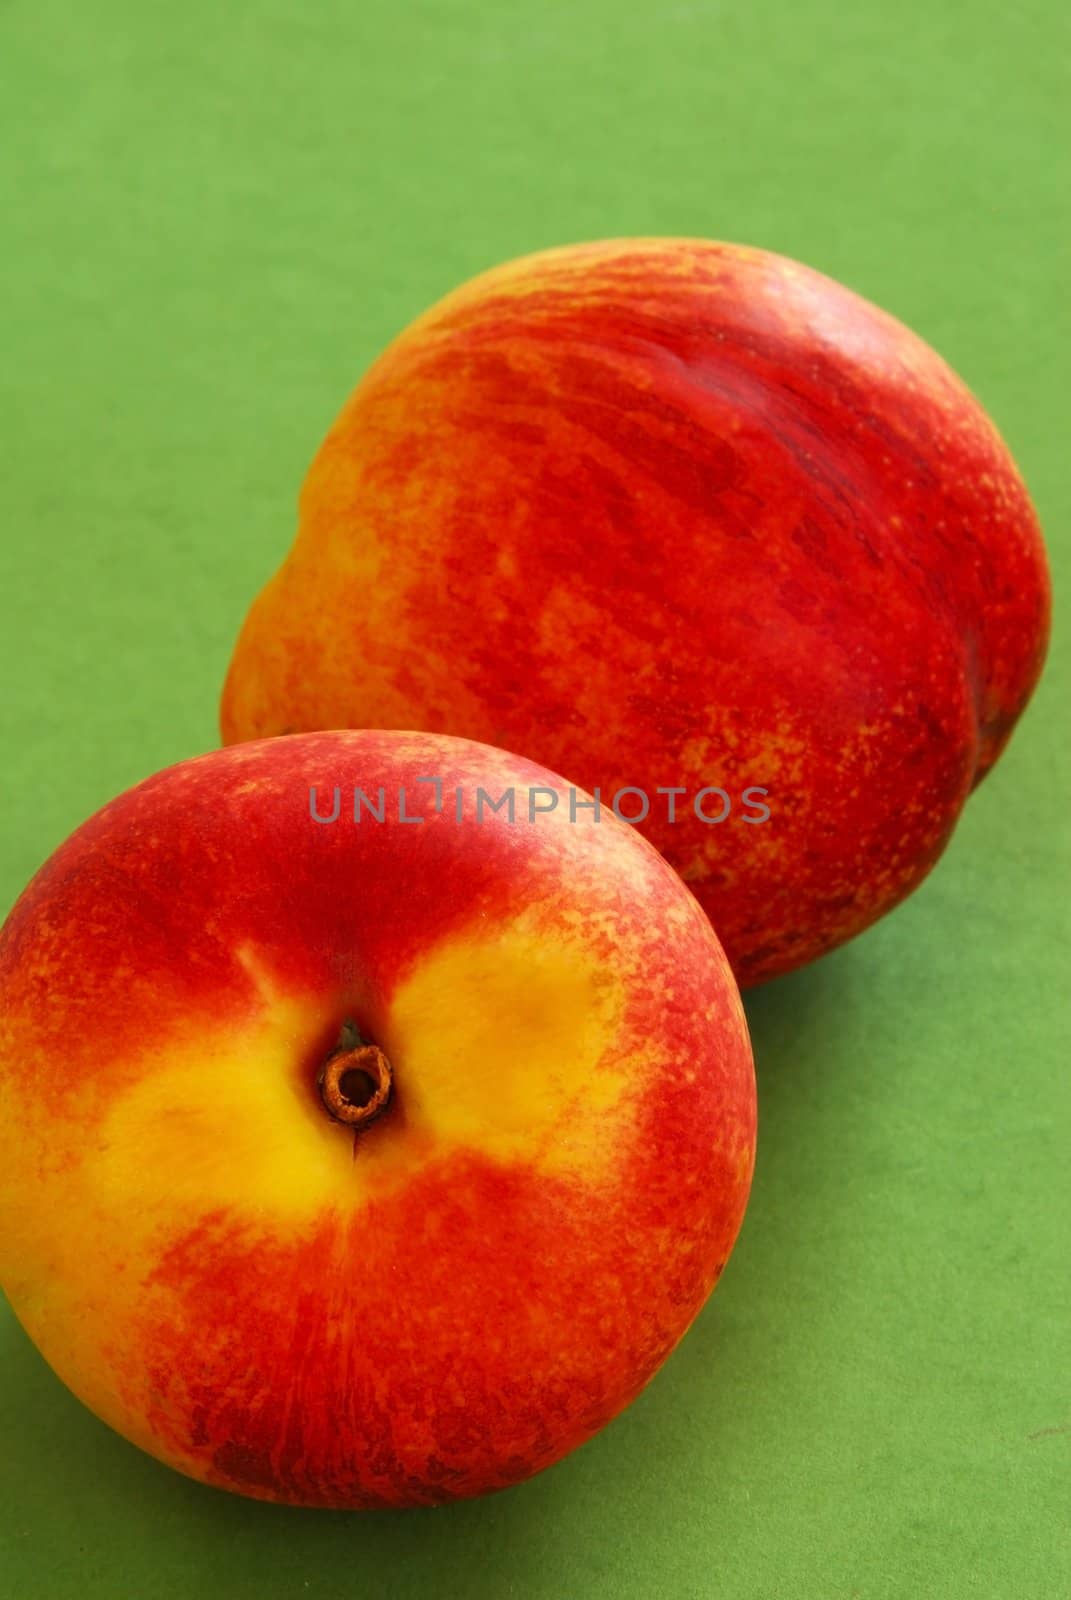 Appetizing ripe peaches by simply